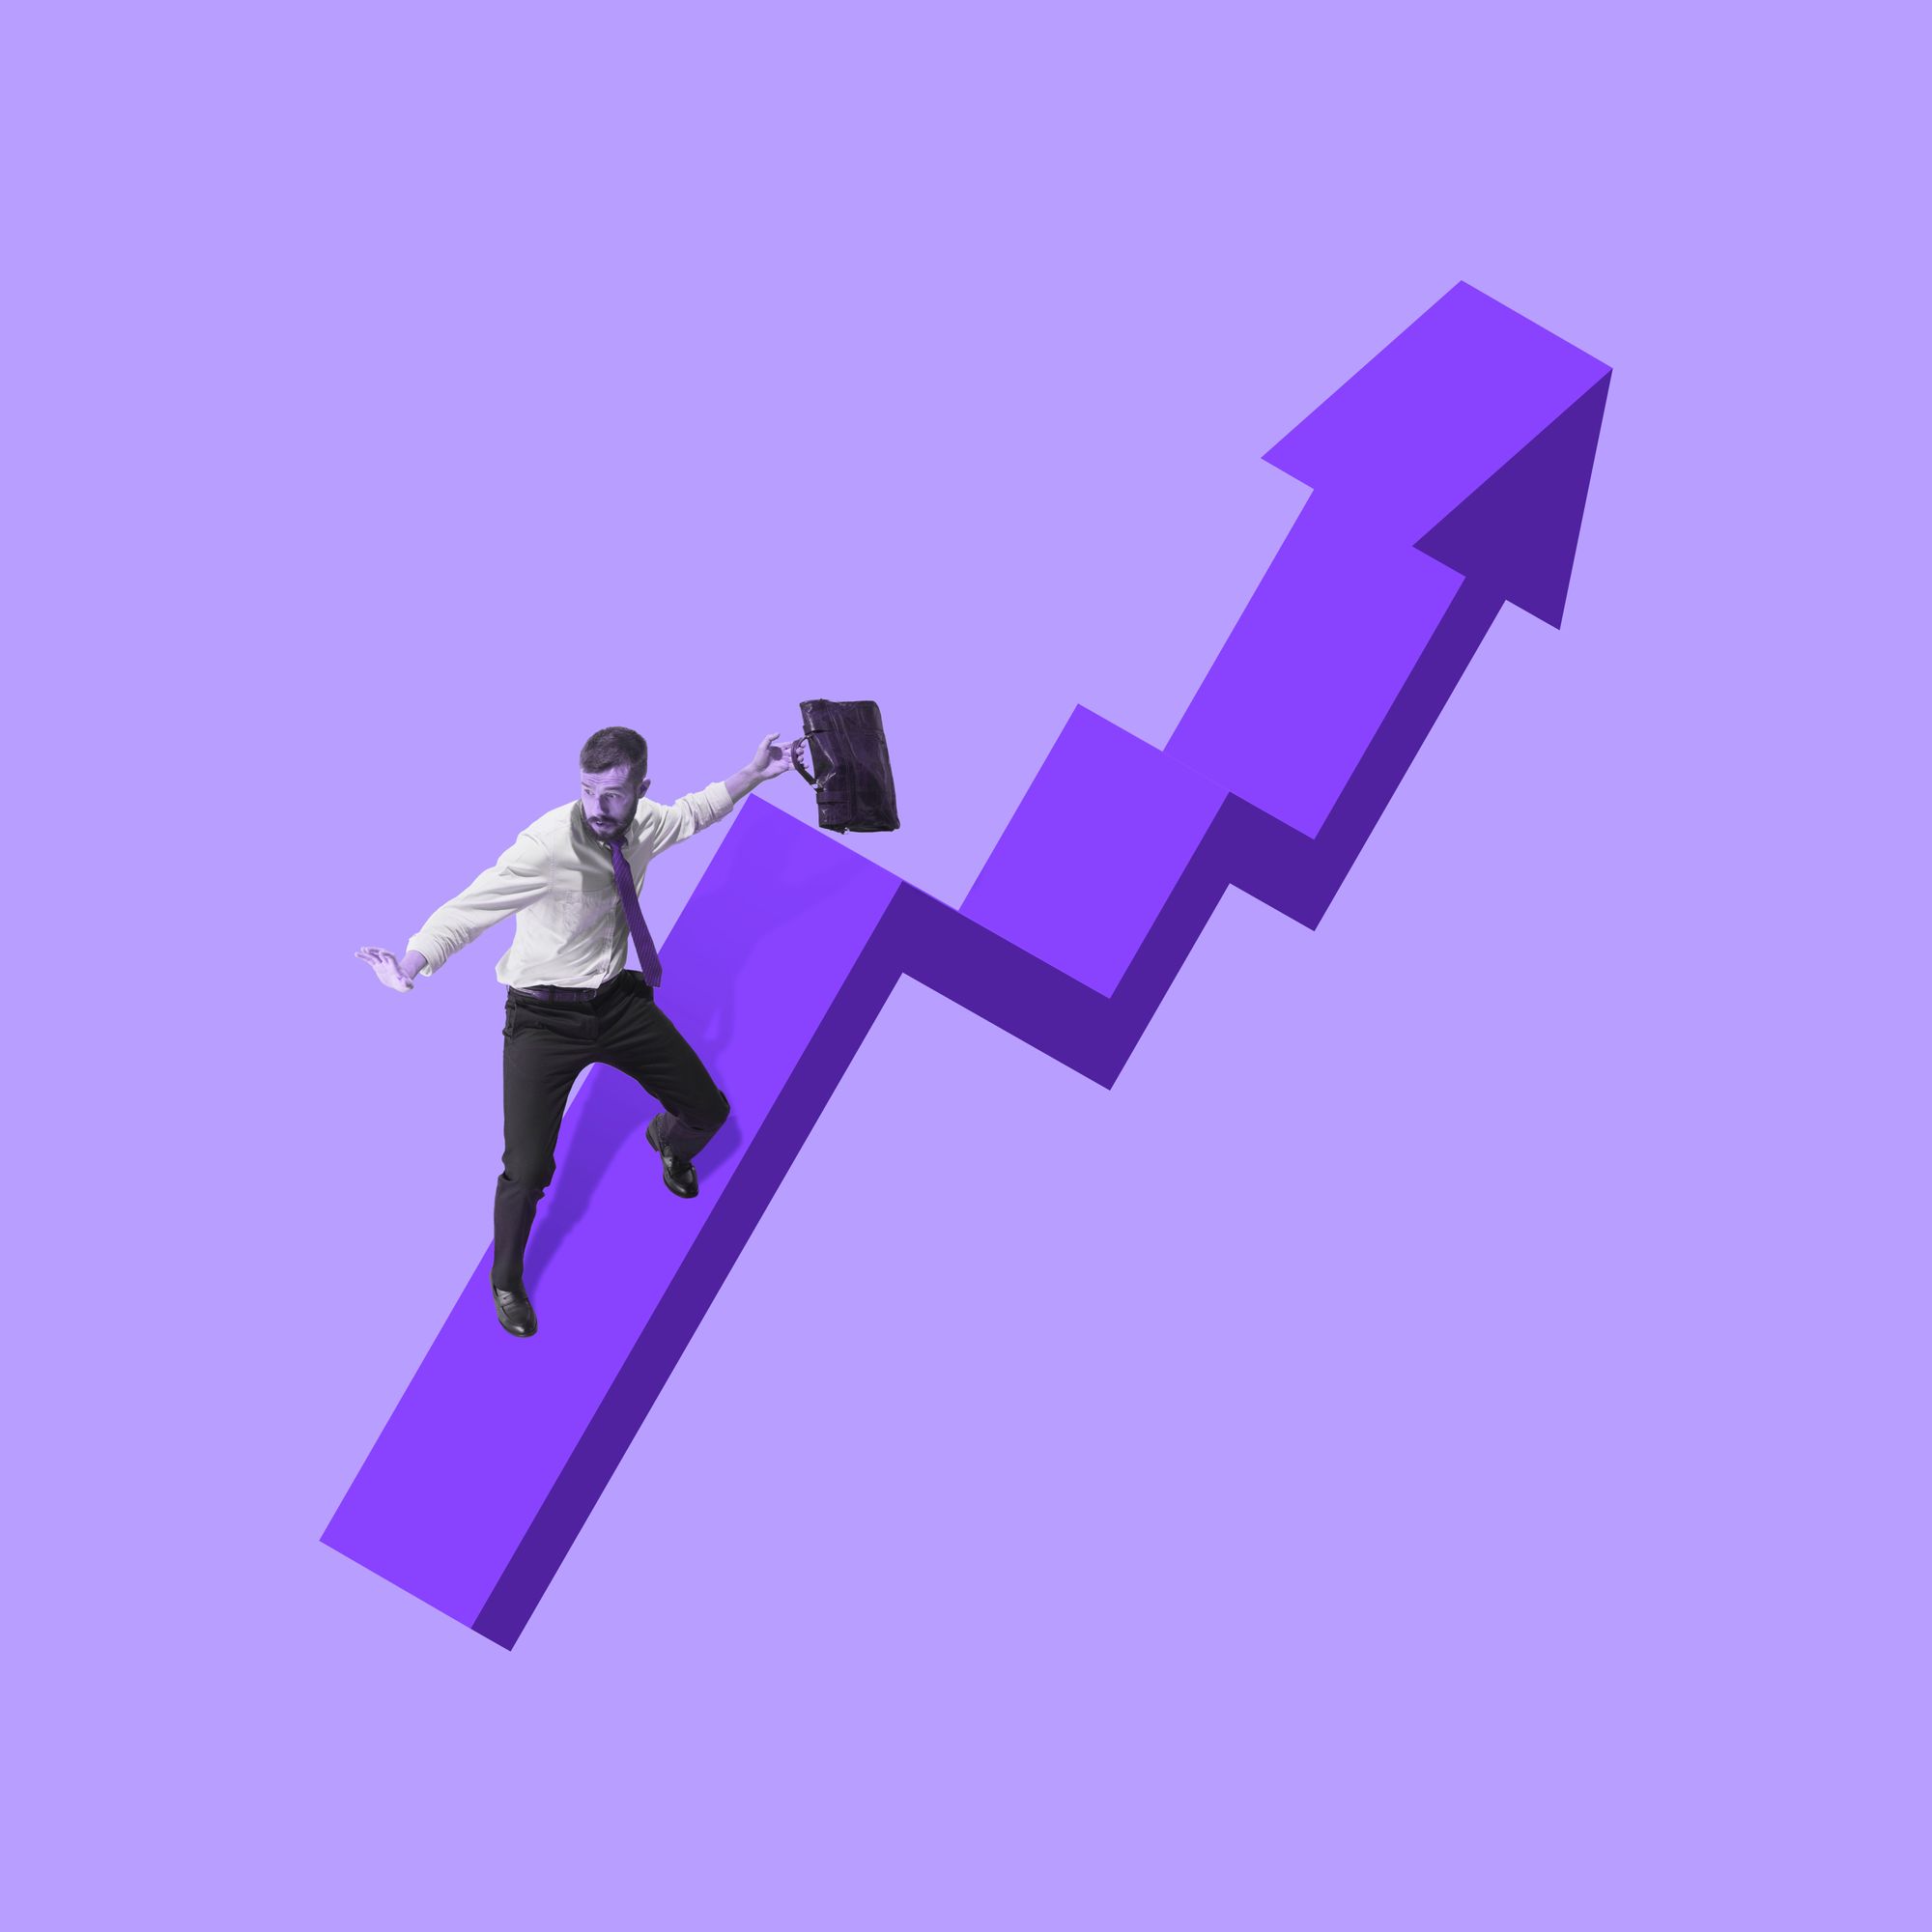 Image of a person with a briefcase sliding down a three-dimensional rising graph arrow.